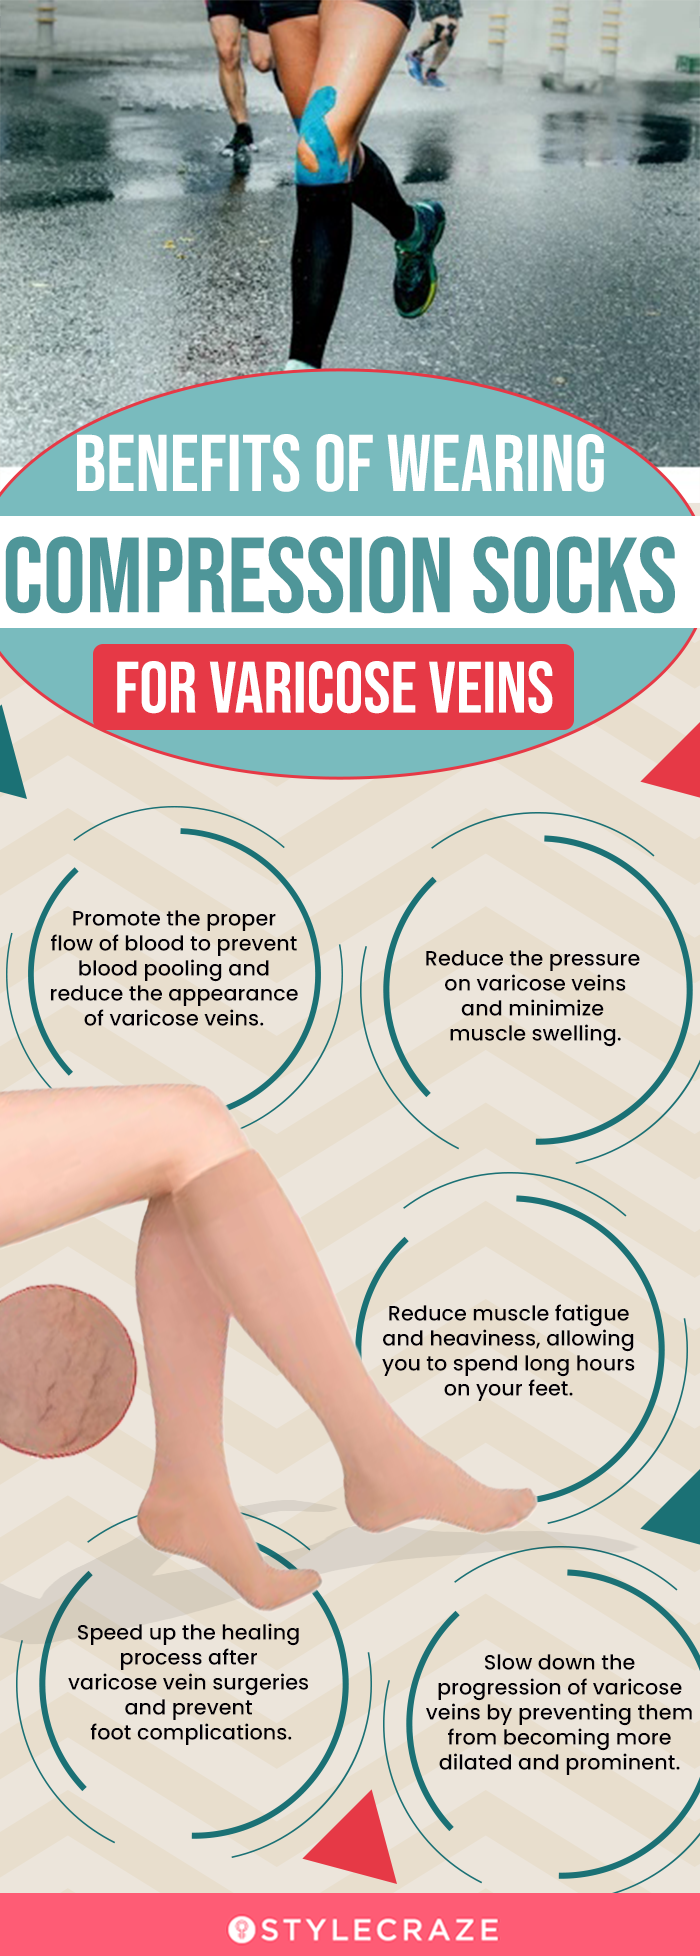 Benefits Of Wearing Compression Socks For Varicose Veins (infographic)